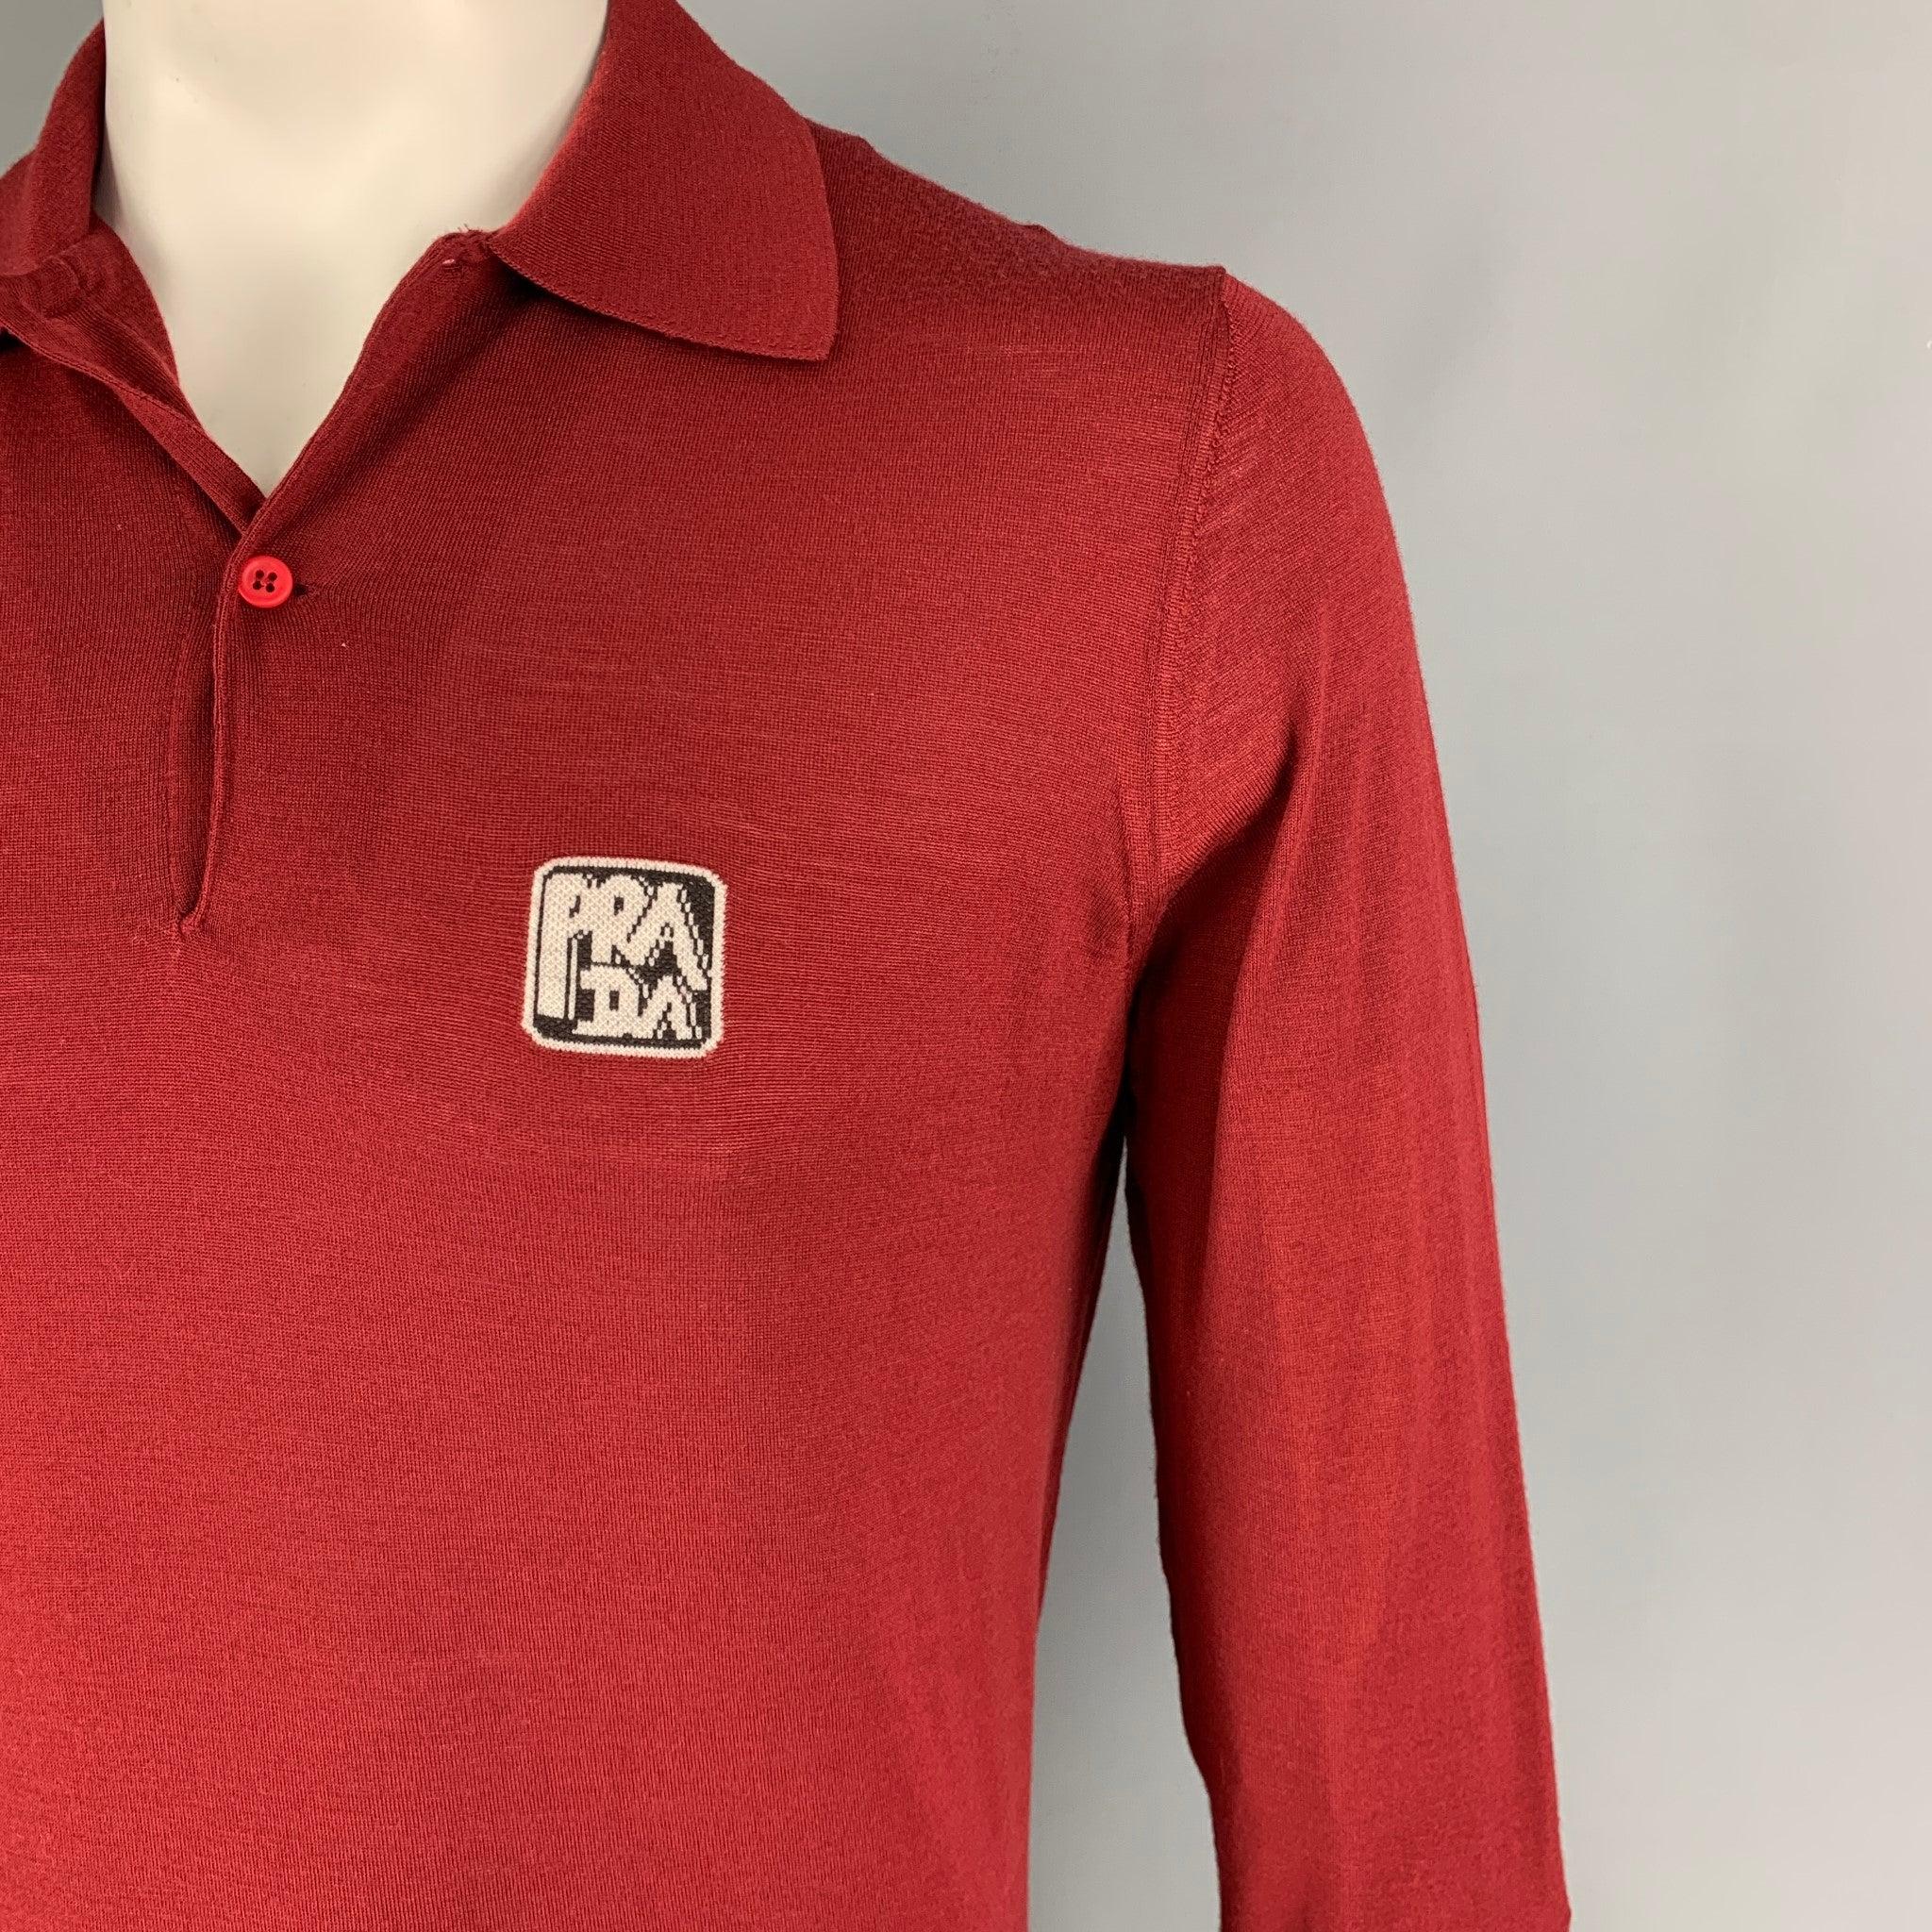 PRADA pullover comes in a burgundy knitted wool featuring a front logo, spread collar, and a half buttoned closure. Made in Italy.
Excellent
Pre-Owned Condition.  

Marked:   52 

Measurements: 
 
Shoulder: 17 inches Chest: 42 inches Sleeve: 29